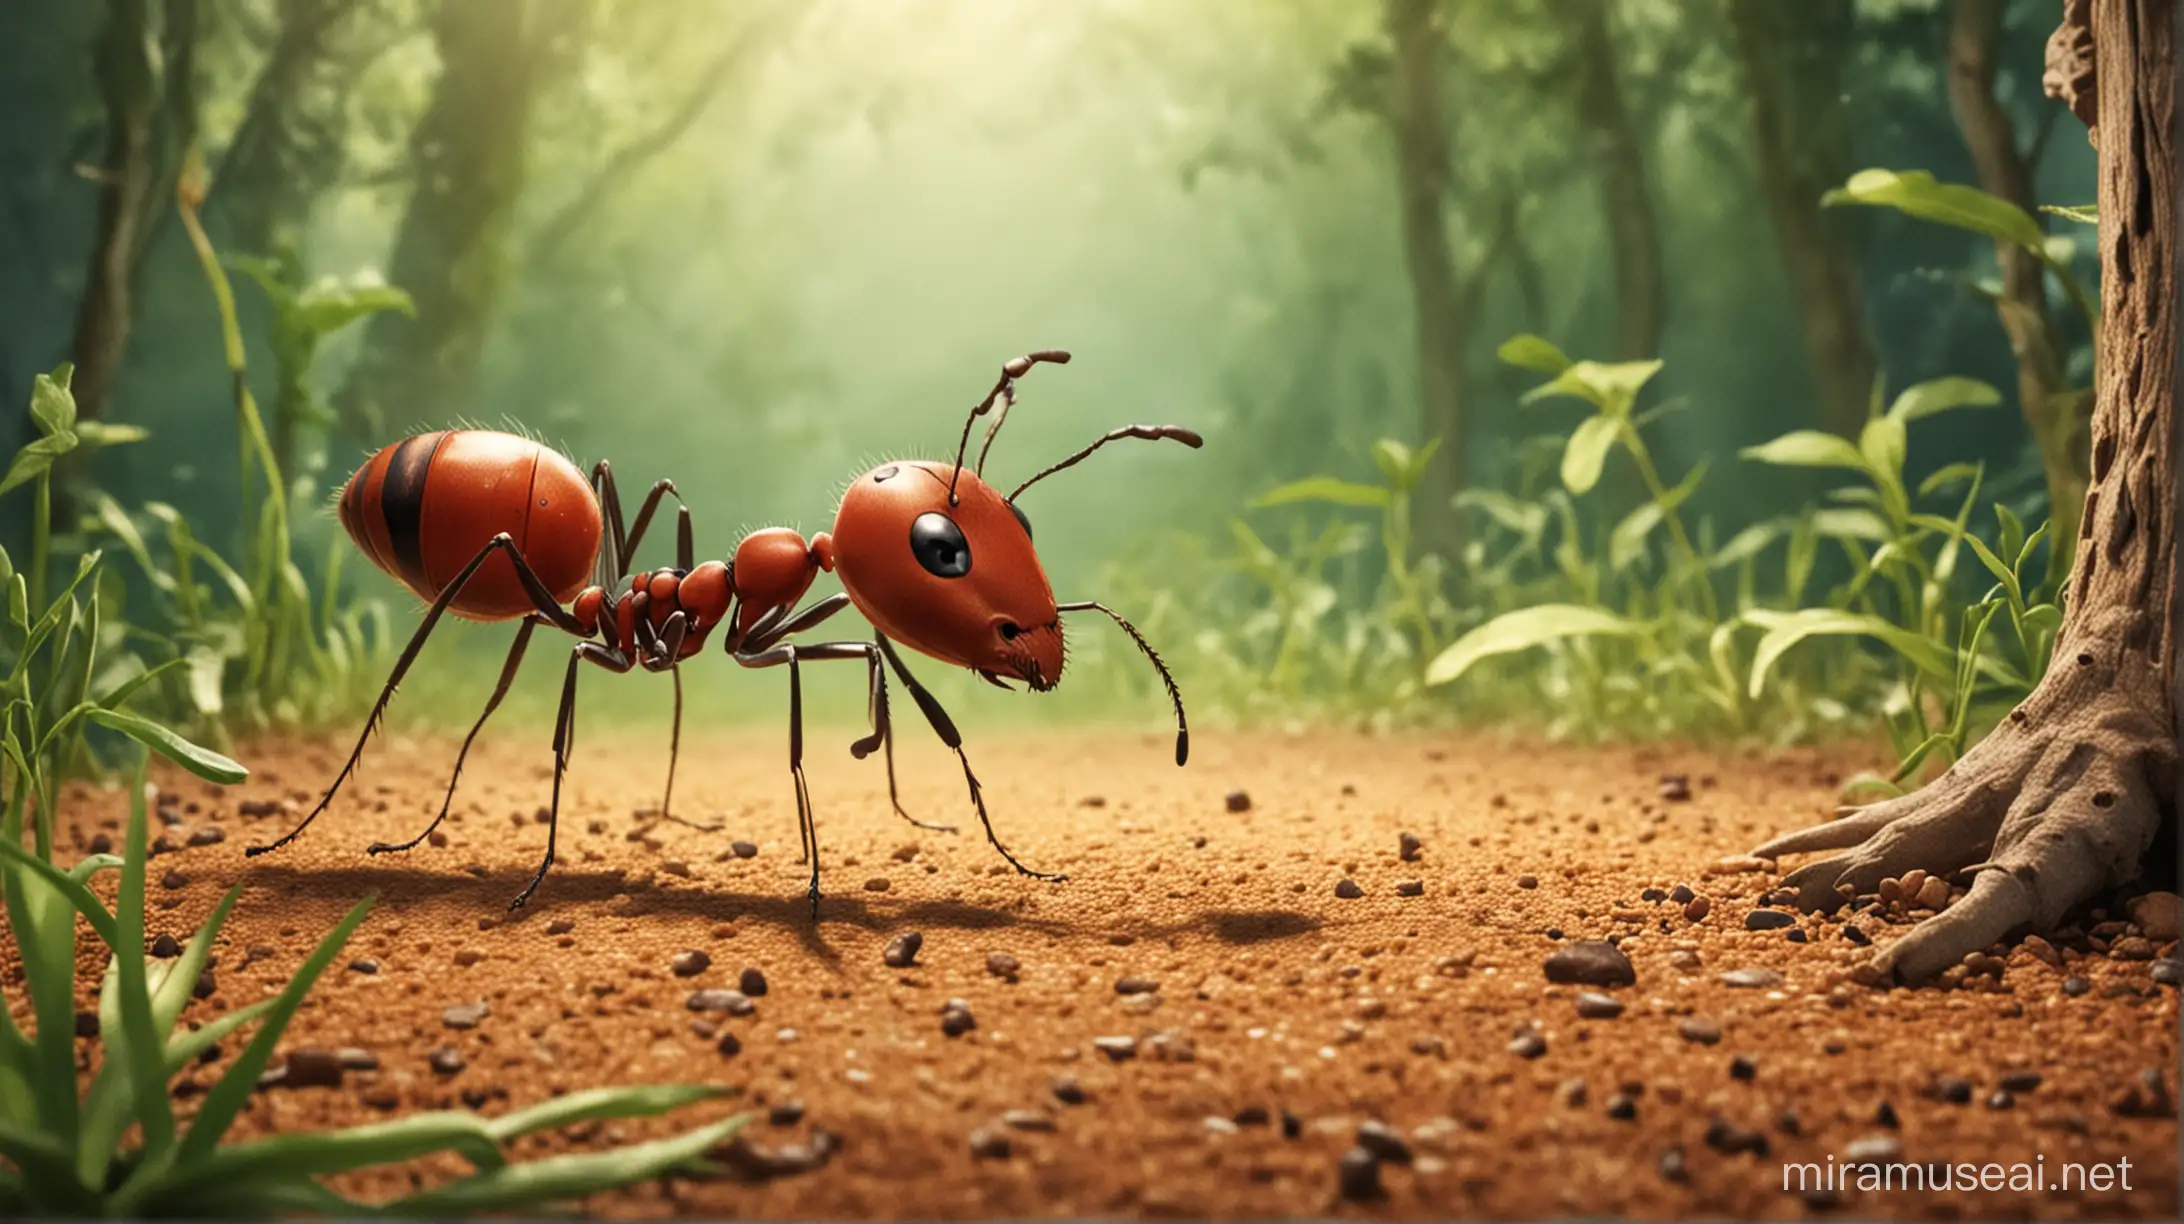 children's story - the Very hungry ant